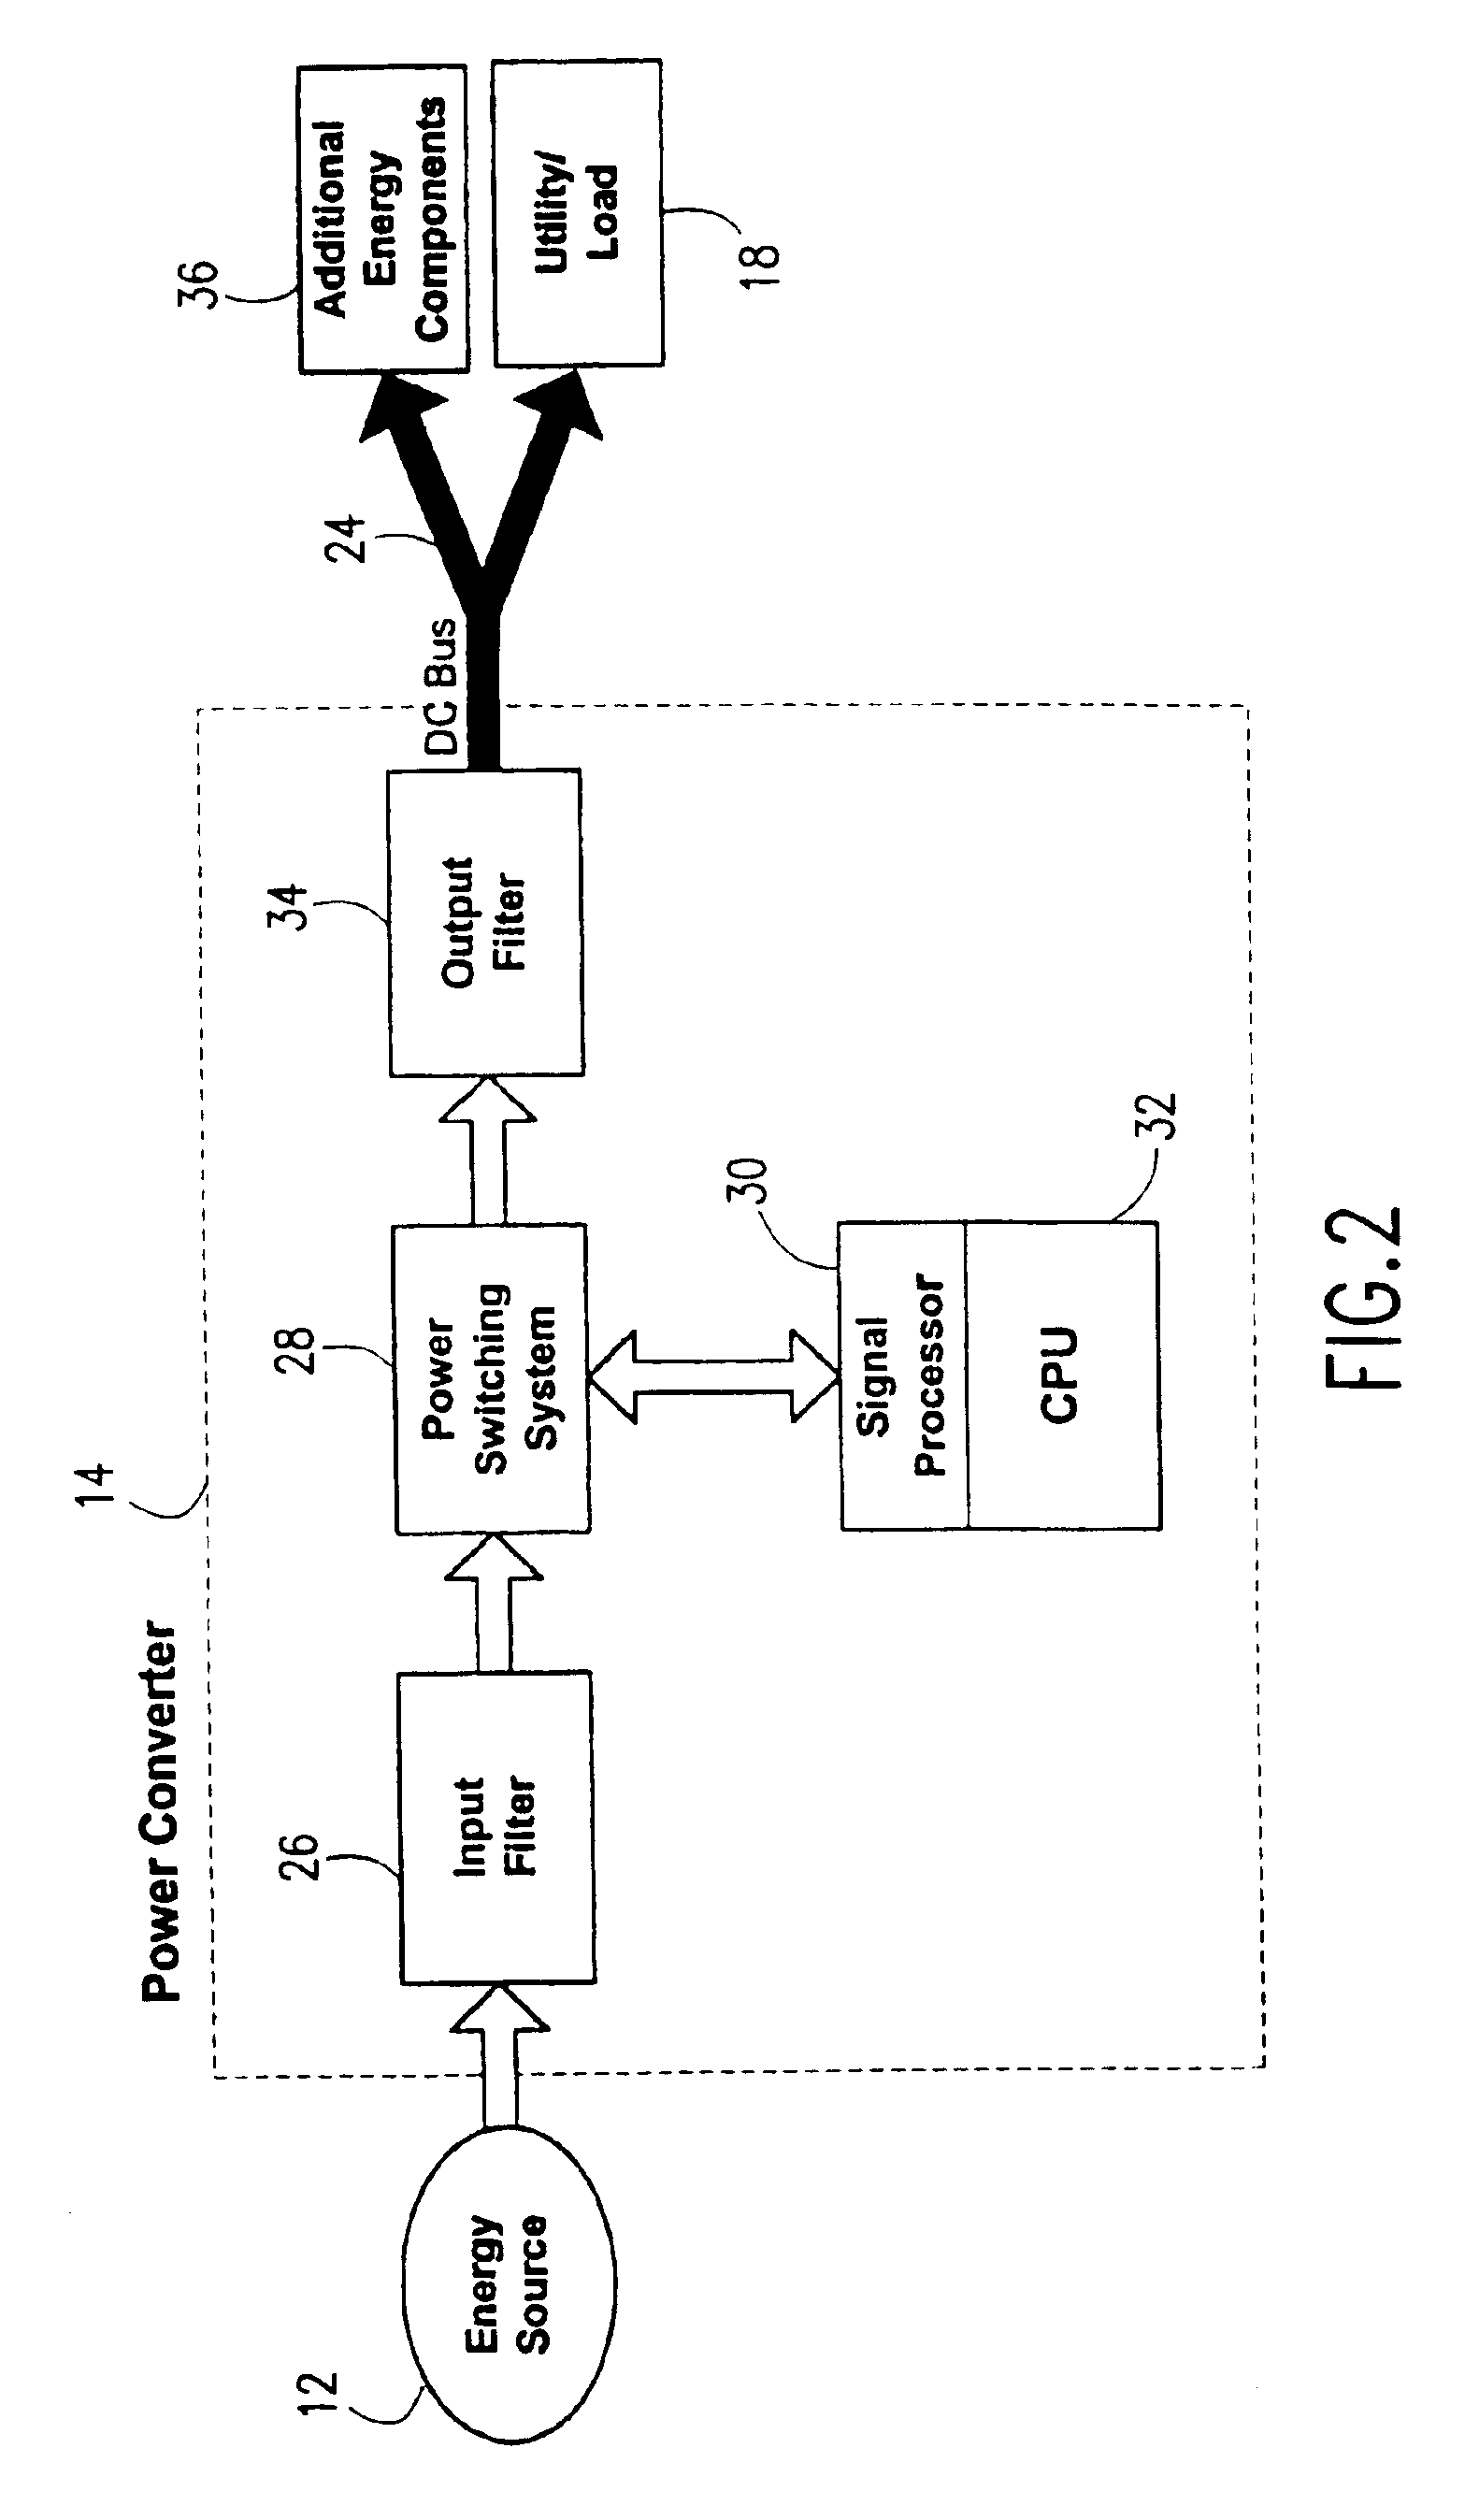 Method and system for control of turbogenerator power and temperature